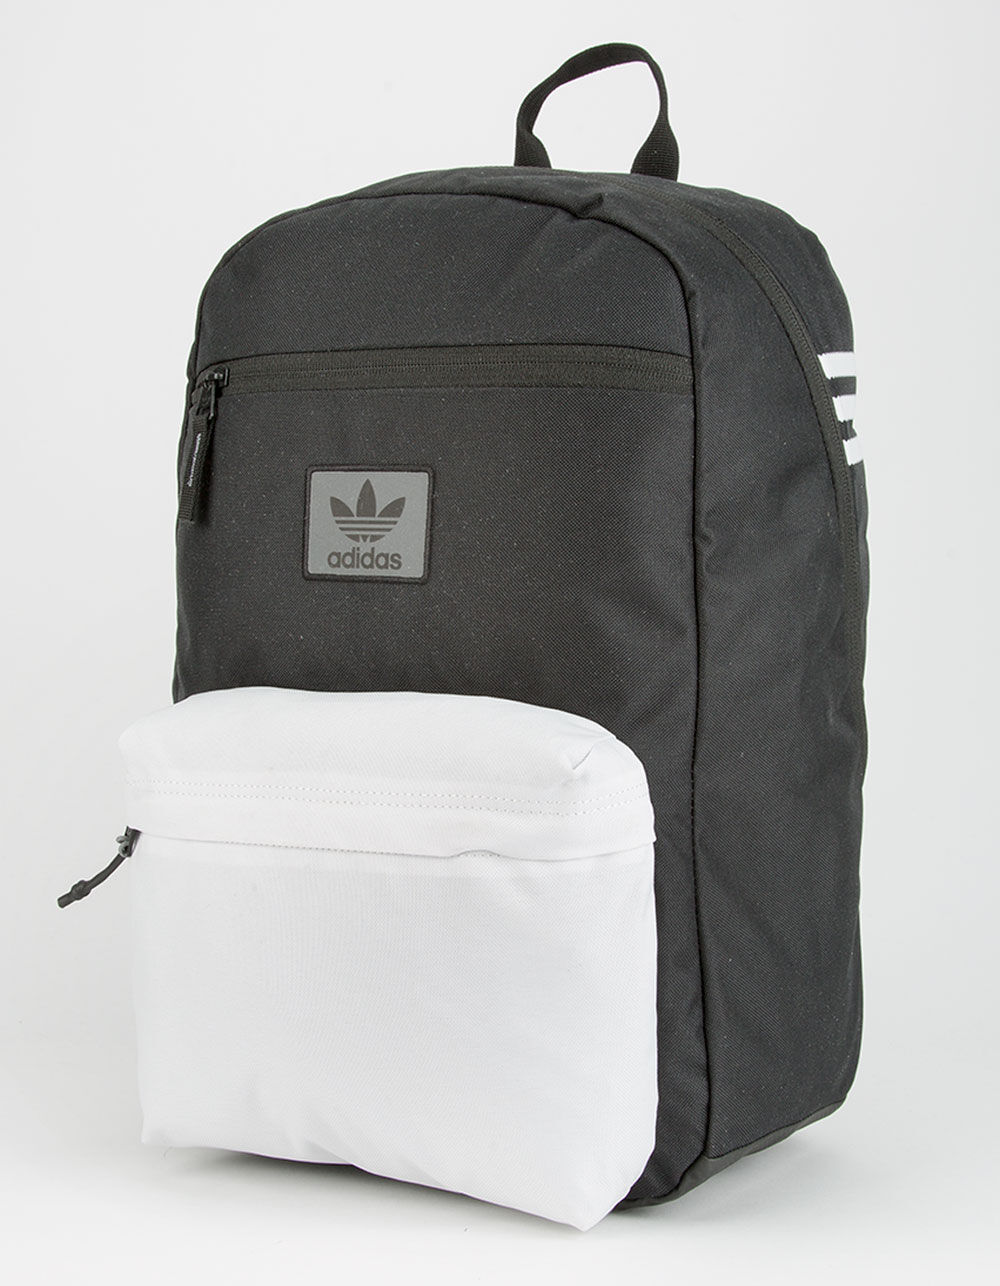 ADIDAS Exclusive Backpack - BLKWH | Tillys